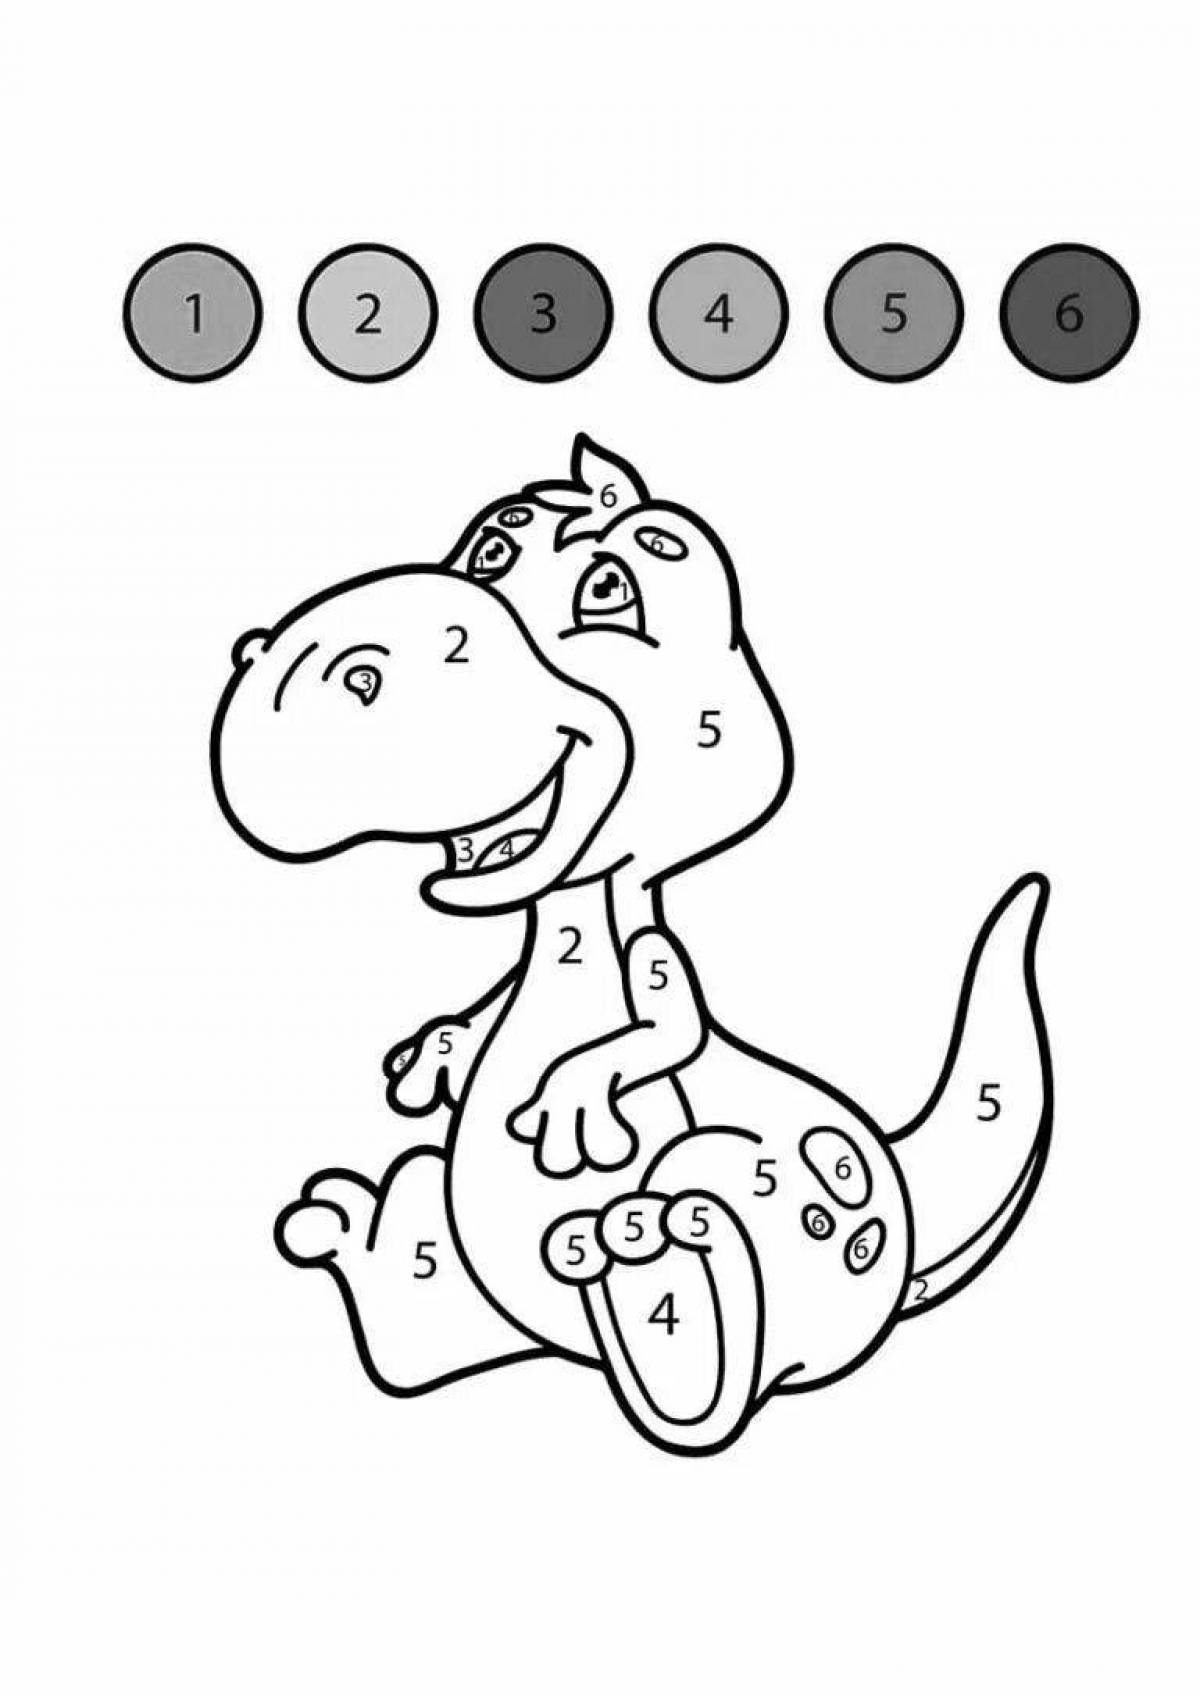 Dinosaur coloring by numbers shiny